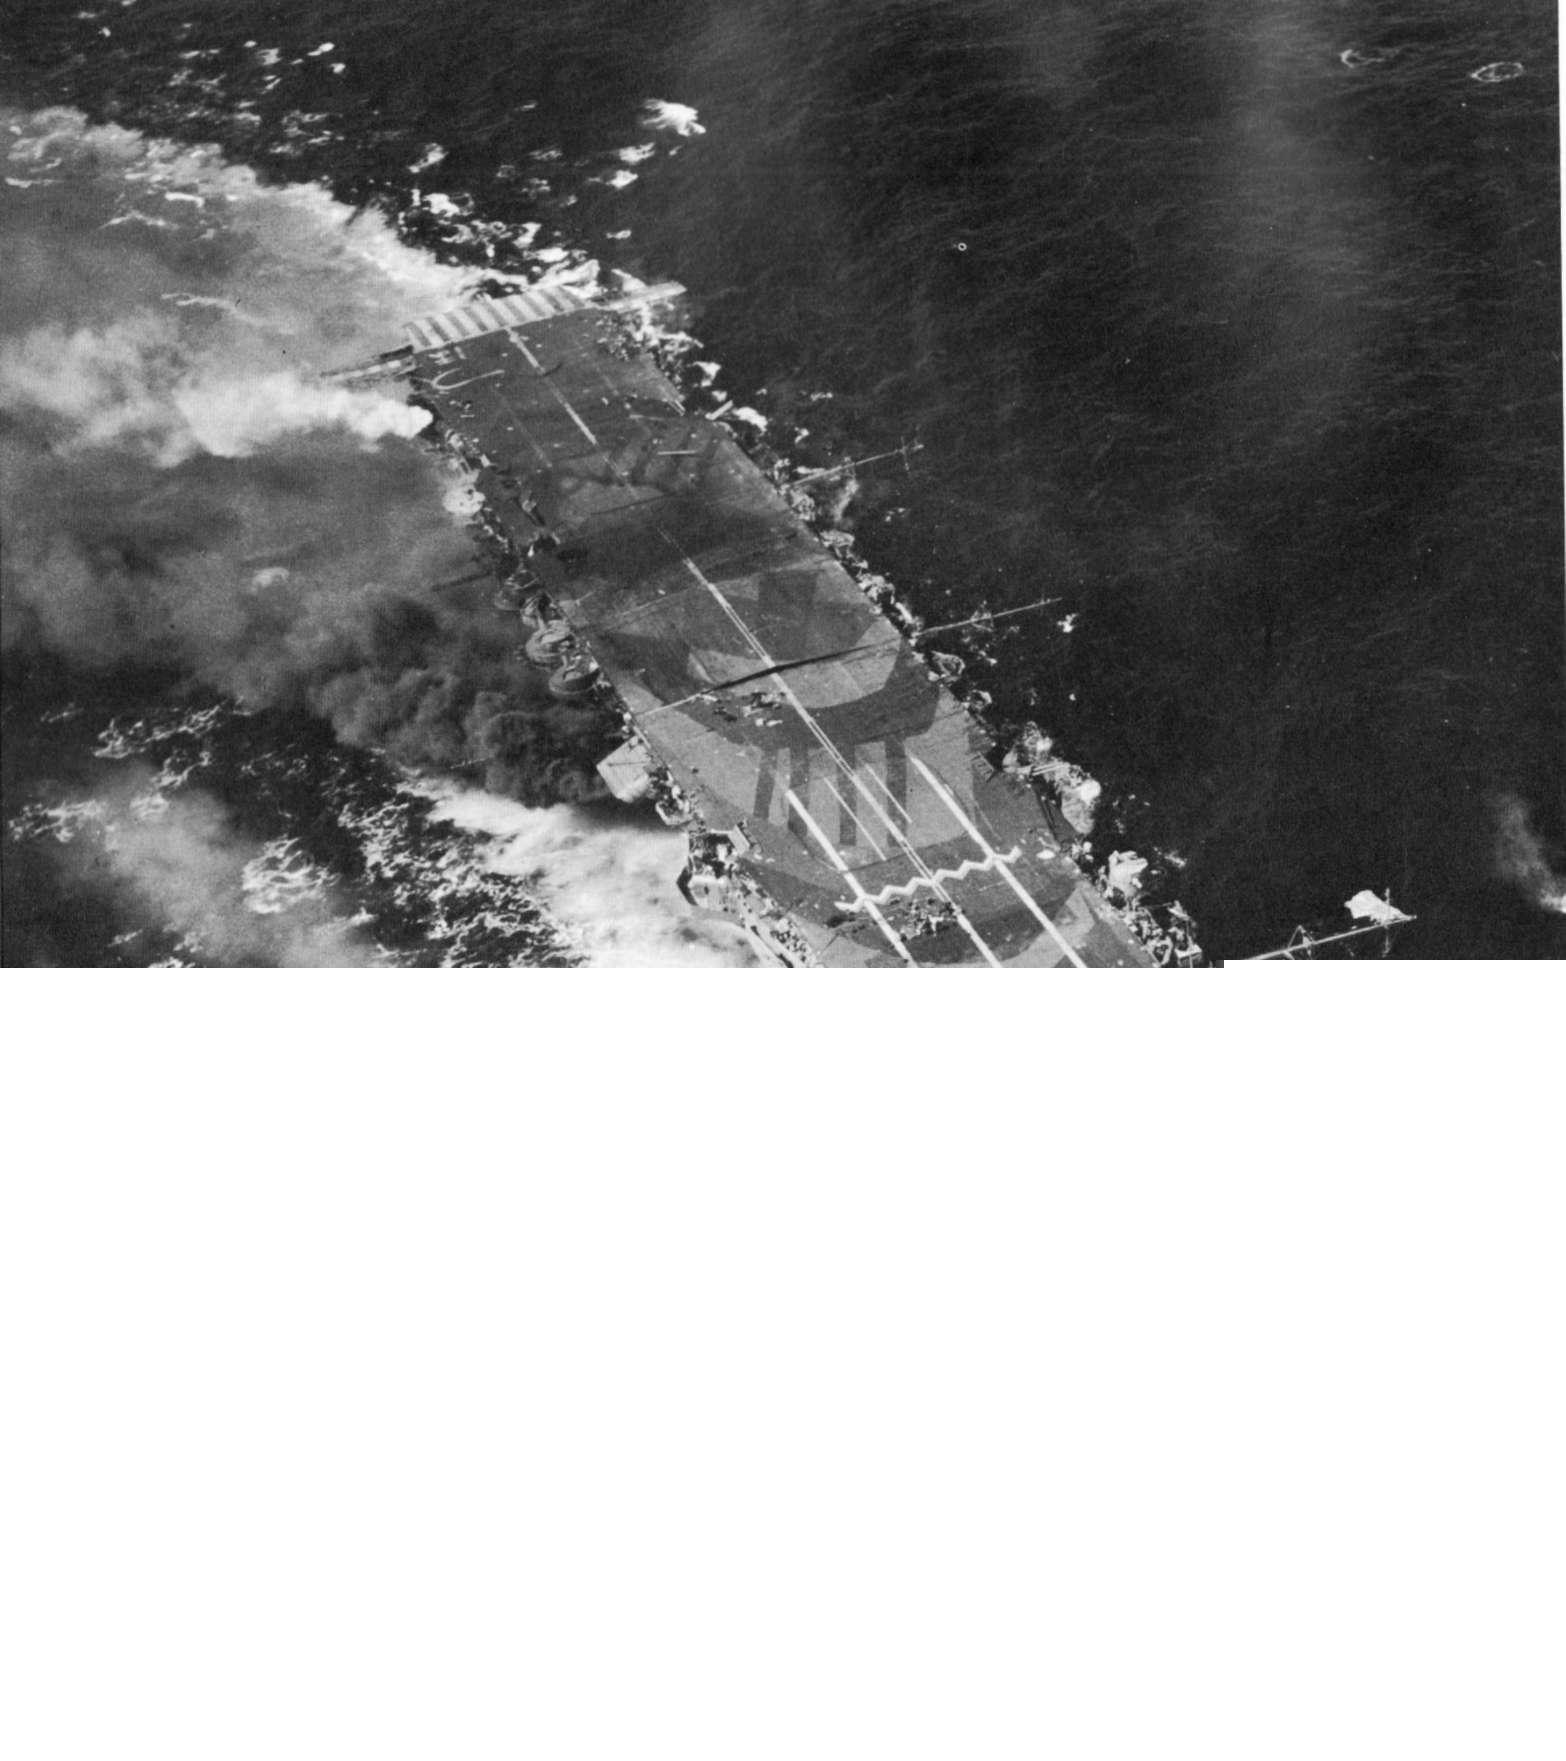 Carrier Zuiho damaged during Battle off Cape Engaño, 25 Oct 1944; note battleship camouflage; as seen on page 68 of US Navy War Photographs